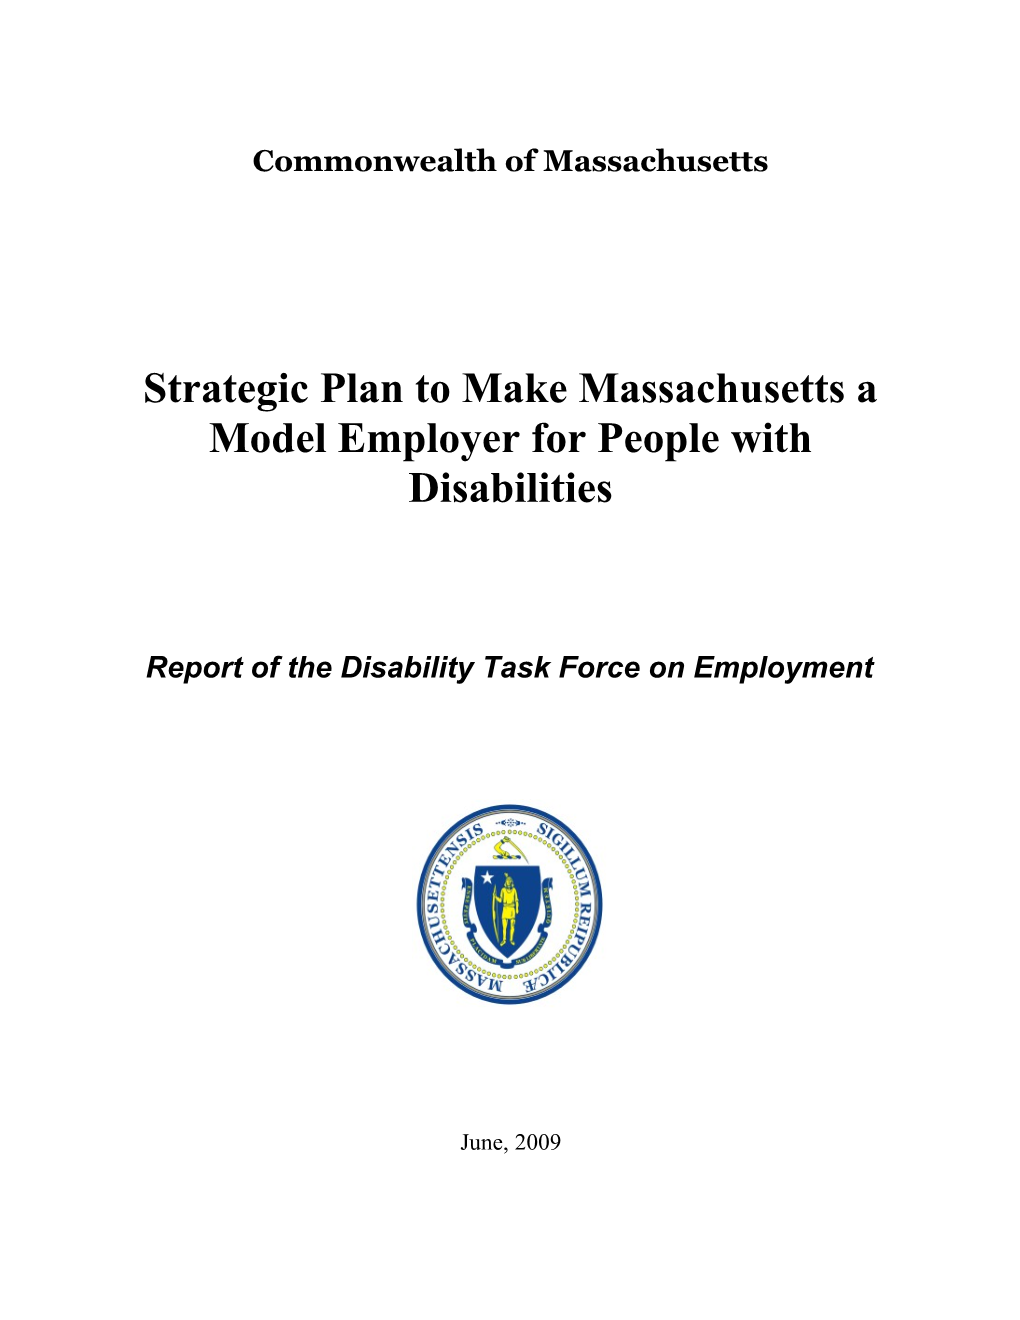 Strategic Plan to Make Massachusetts a Model Employer for People with Disabilities